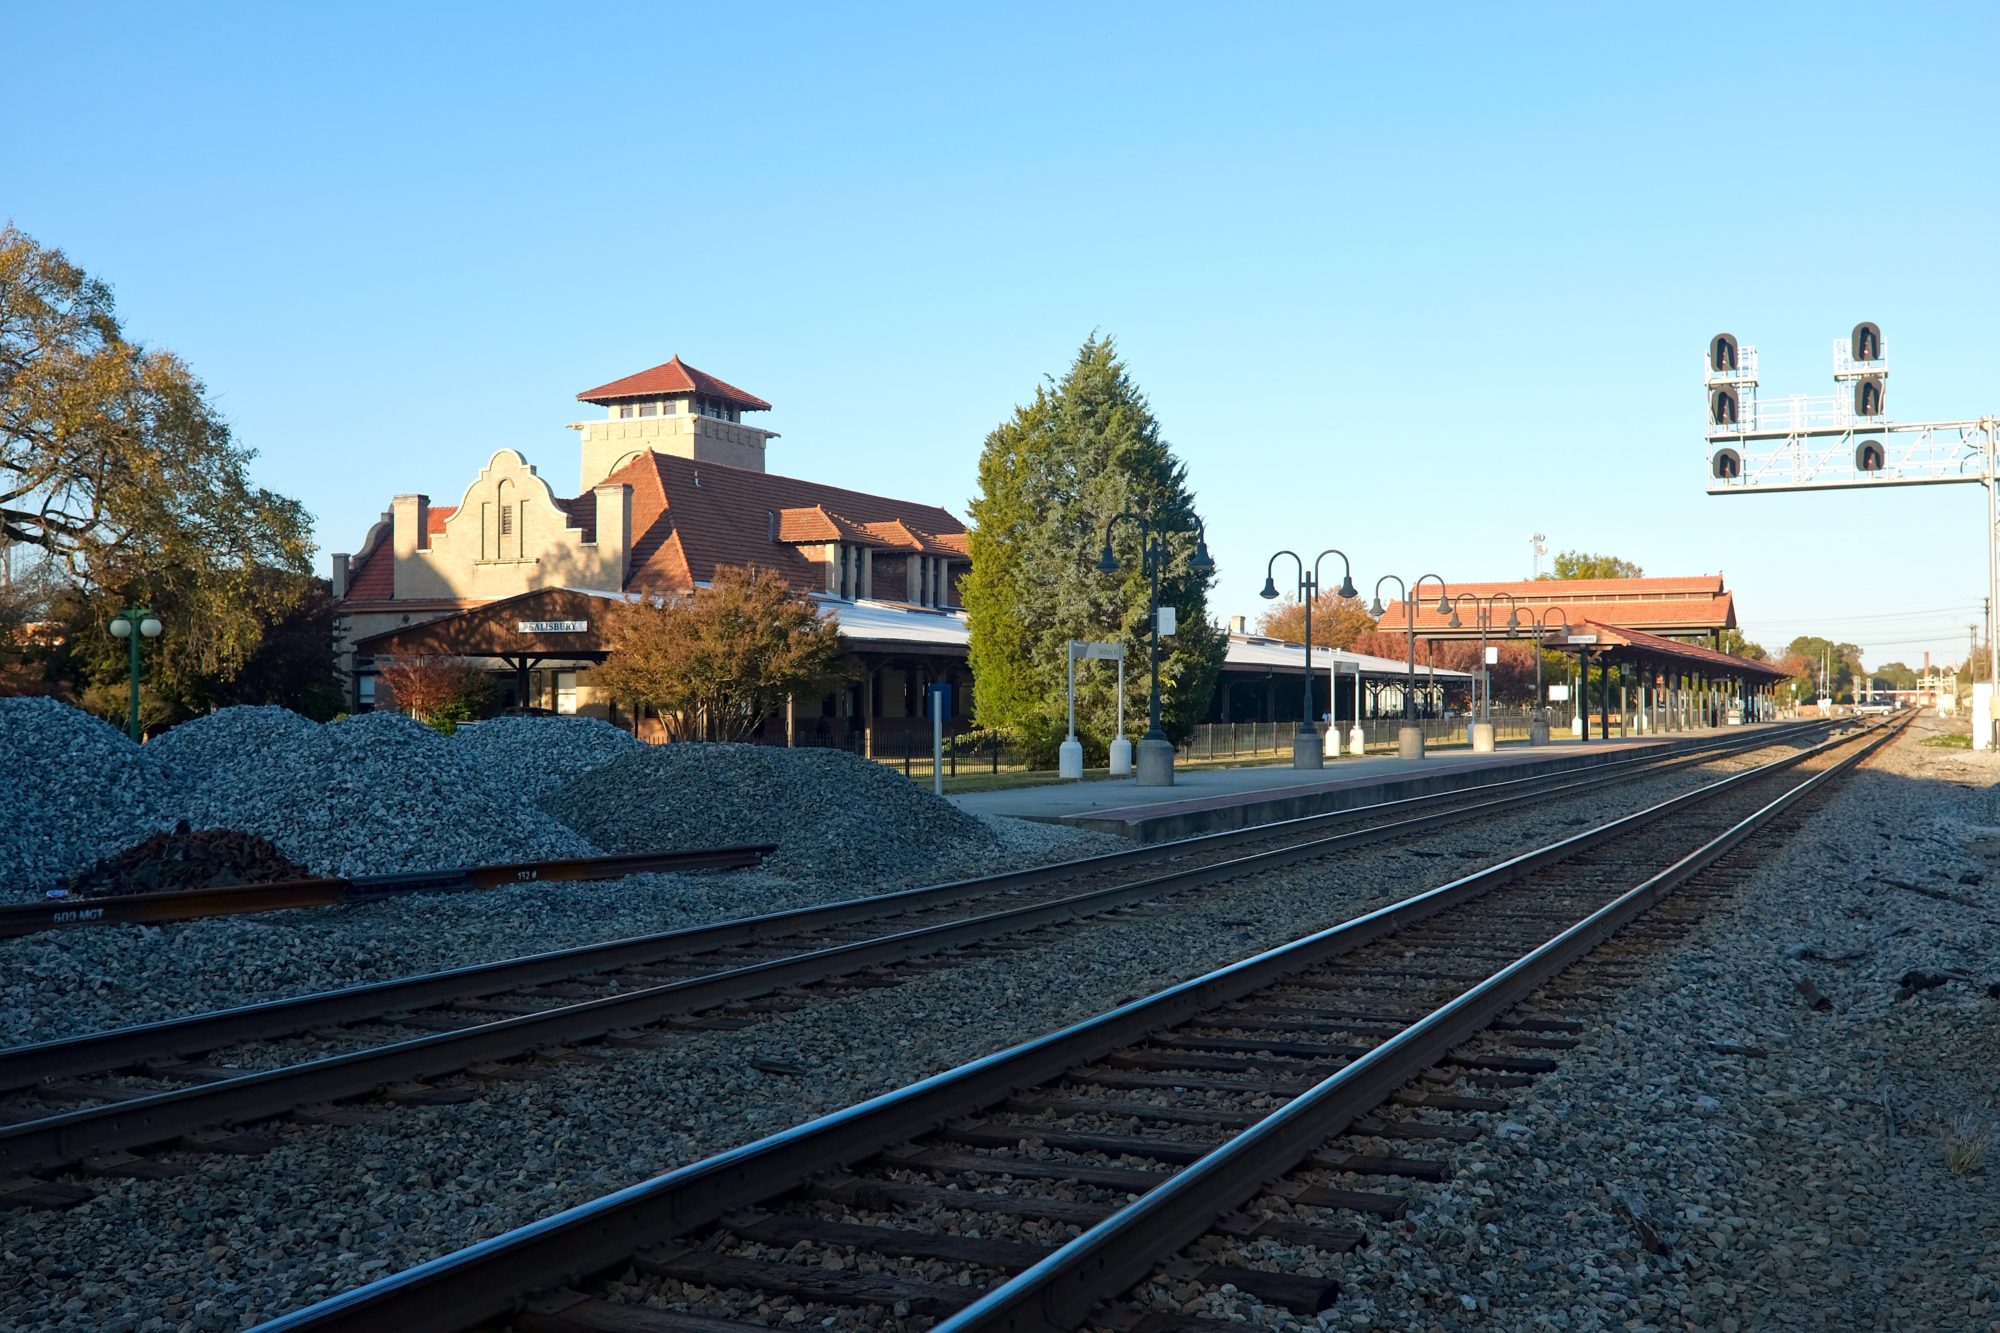 View of Salisbury's train station from across the tracks